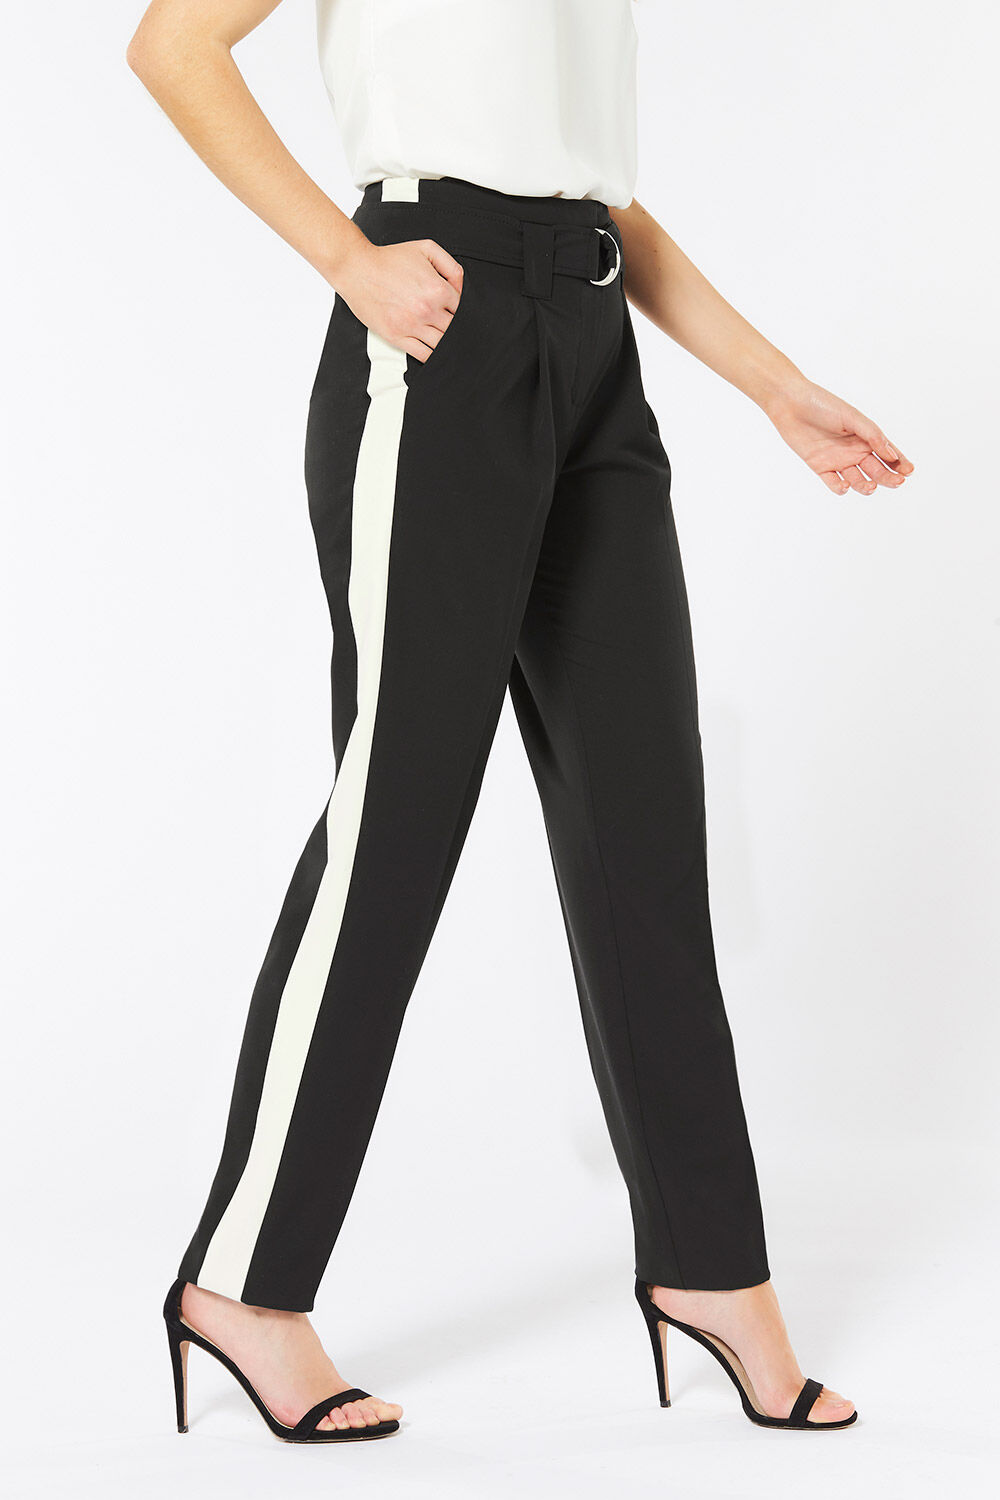 Trends I Can Live With SideStripe Trousers  Ruth Crilly